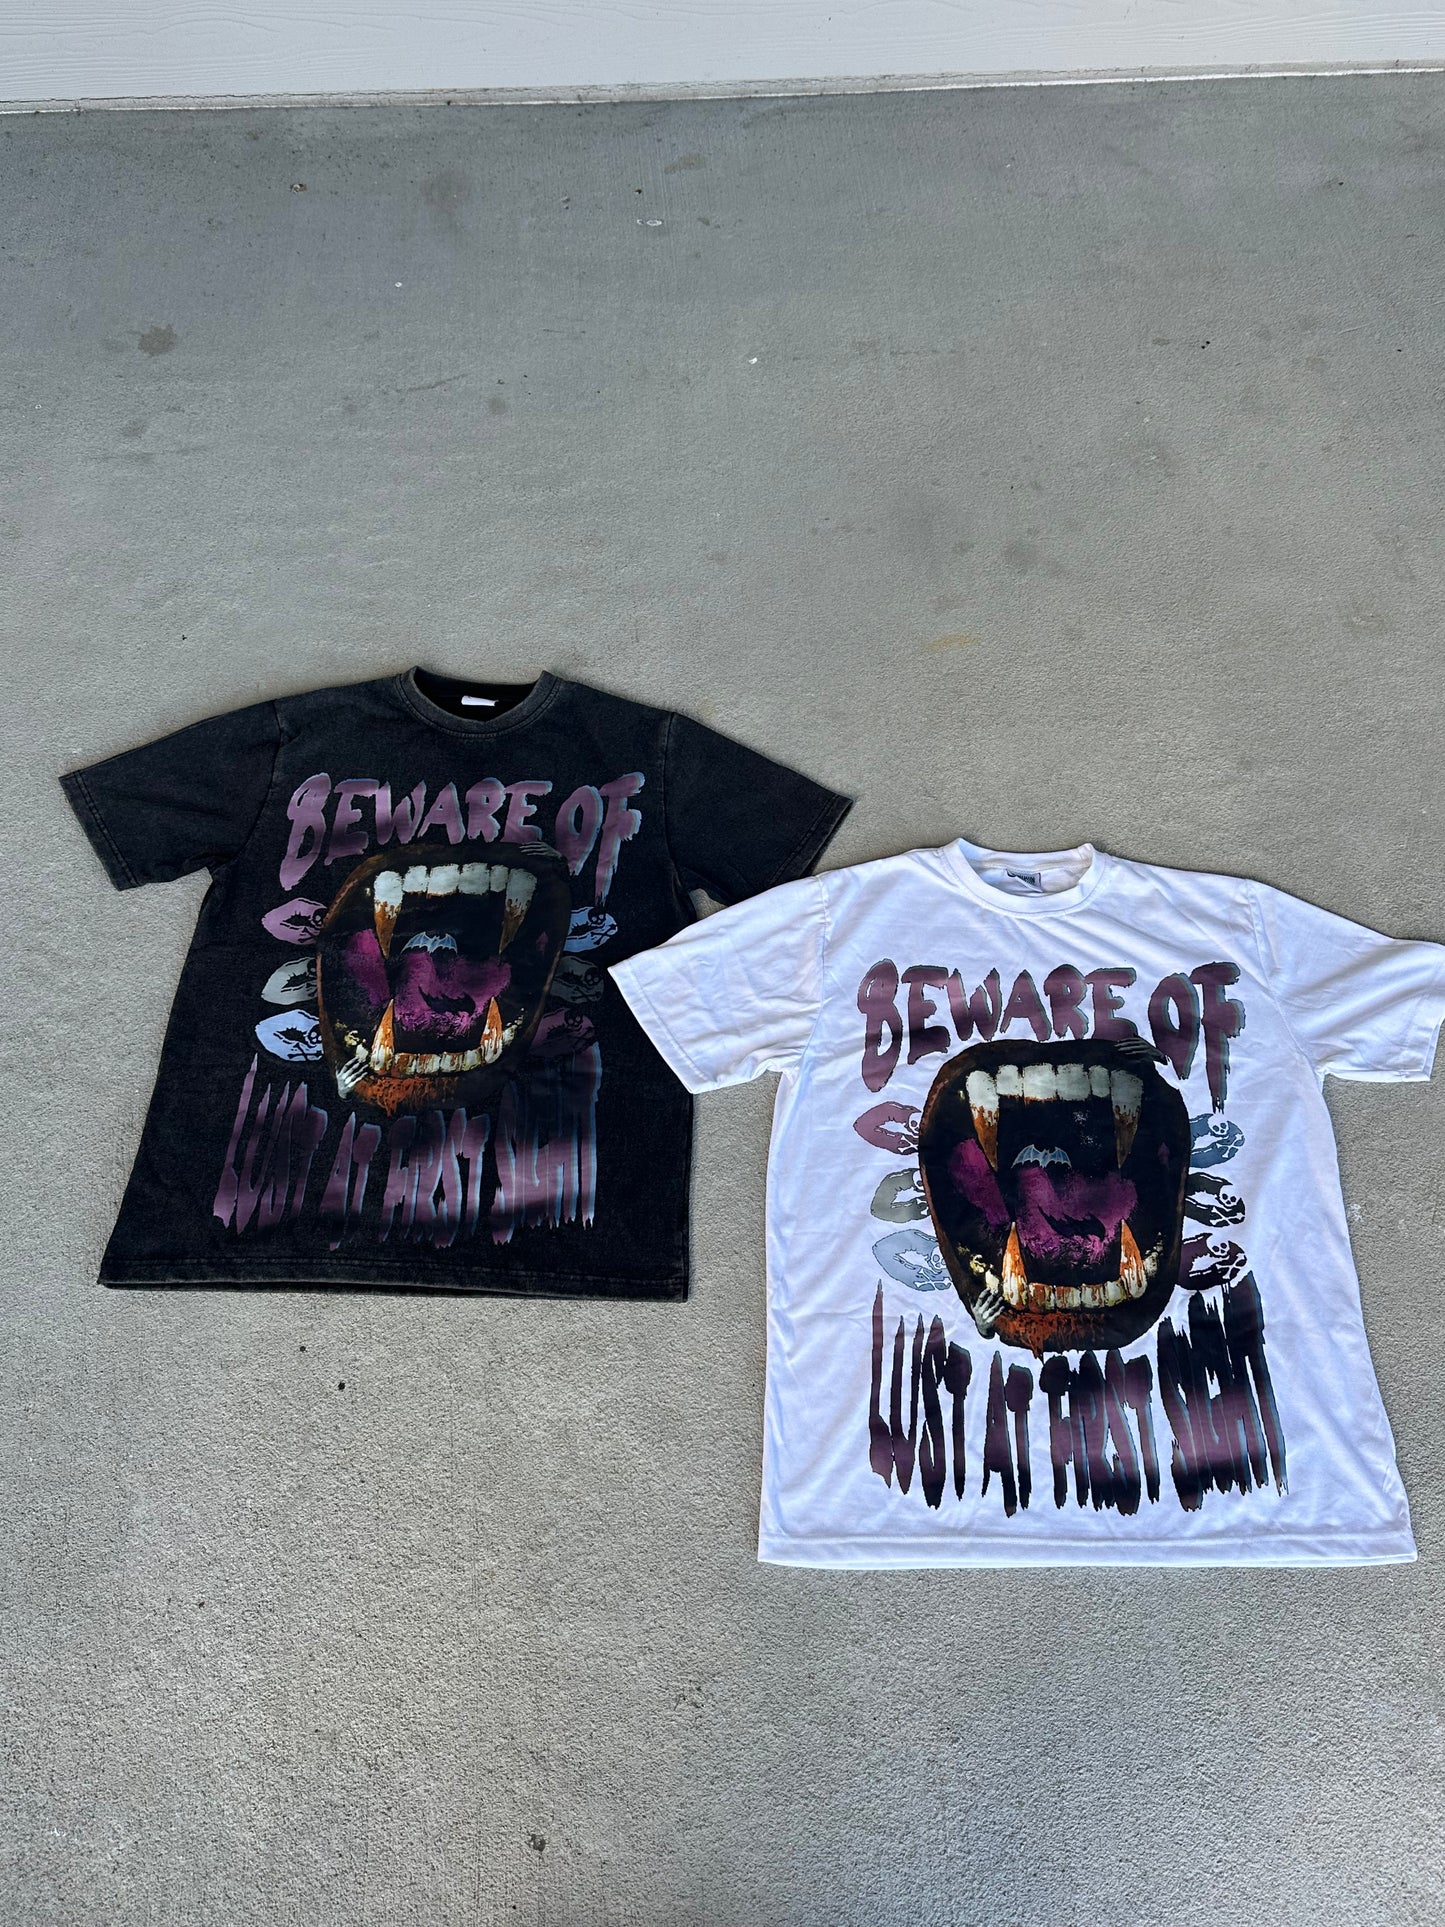 "Beware of Lust at First Sight" Tee